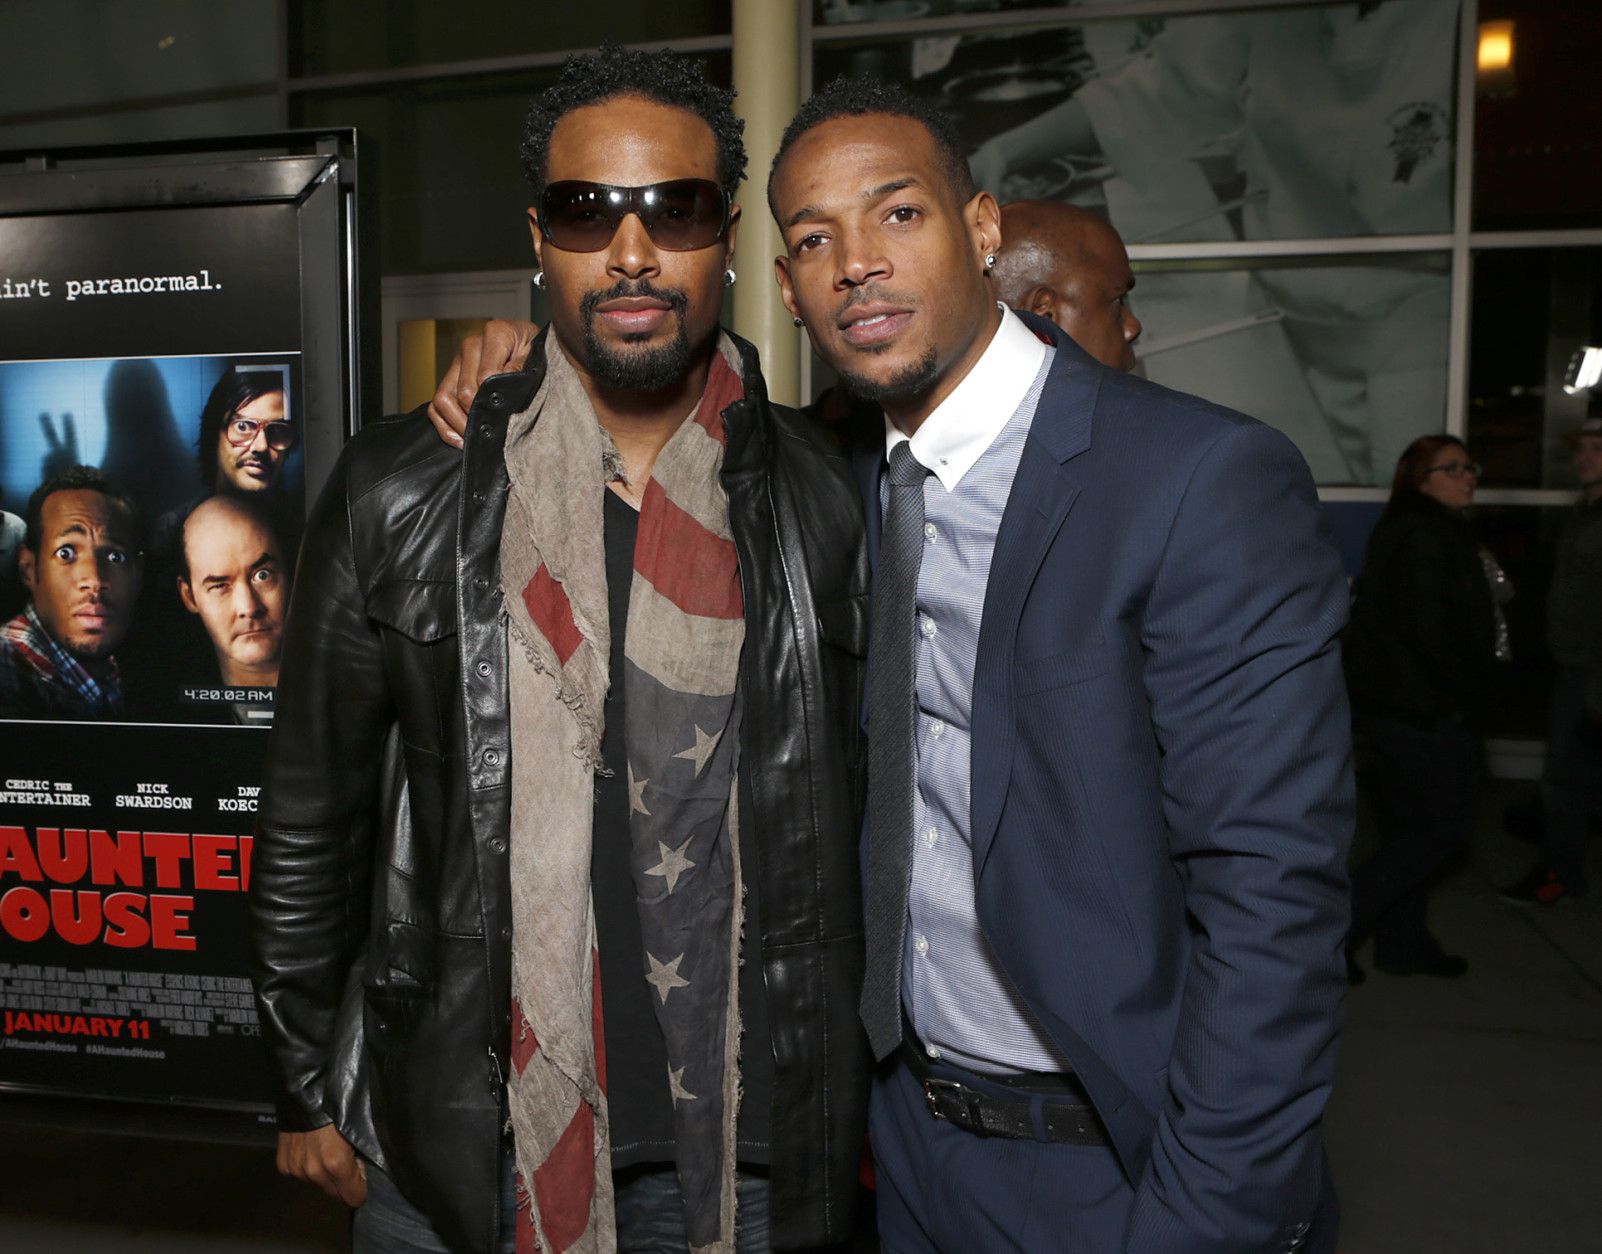 Shawn Wayans and Marlon Wayans attend the premiere of "A Haunted House" at the Arclight Hollywood on Thursday, Jan. 3, 2013, in Los Angeles. (Photo by Todd Williamson/Invision/AP)